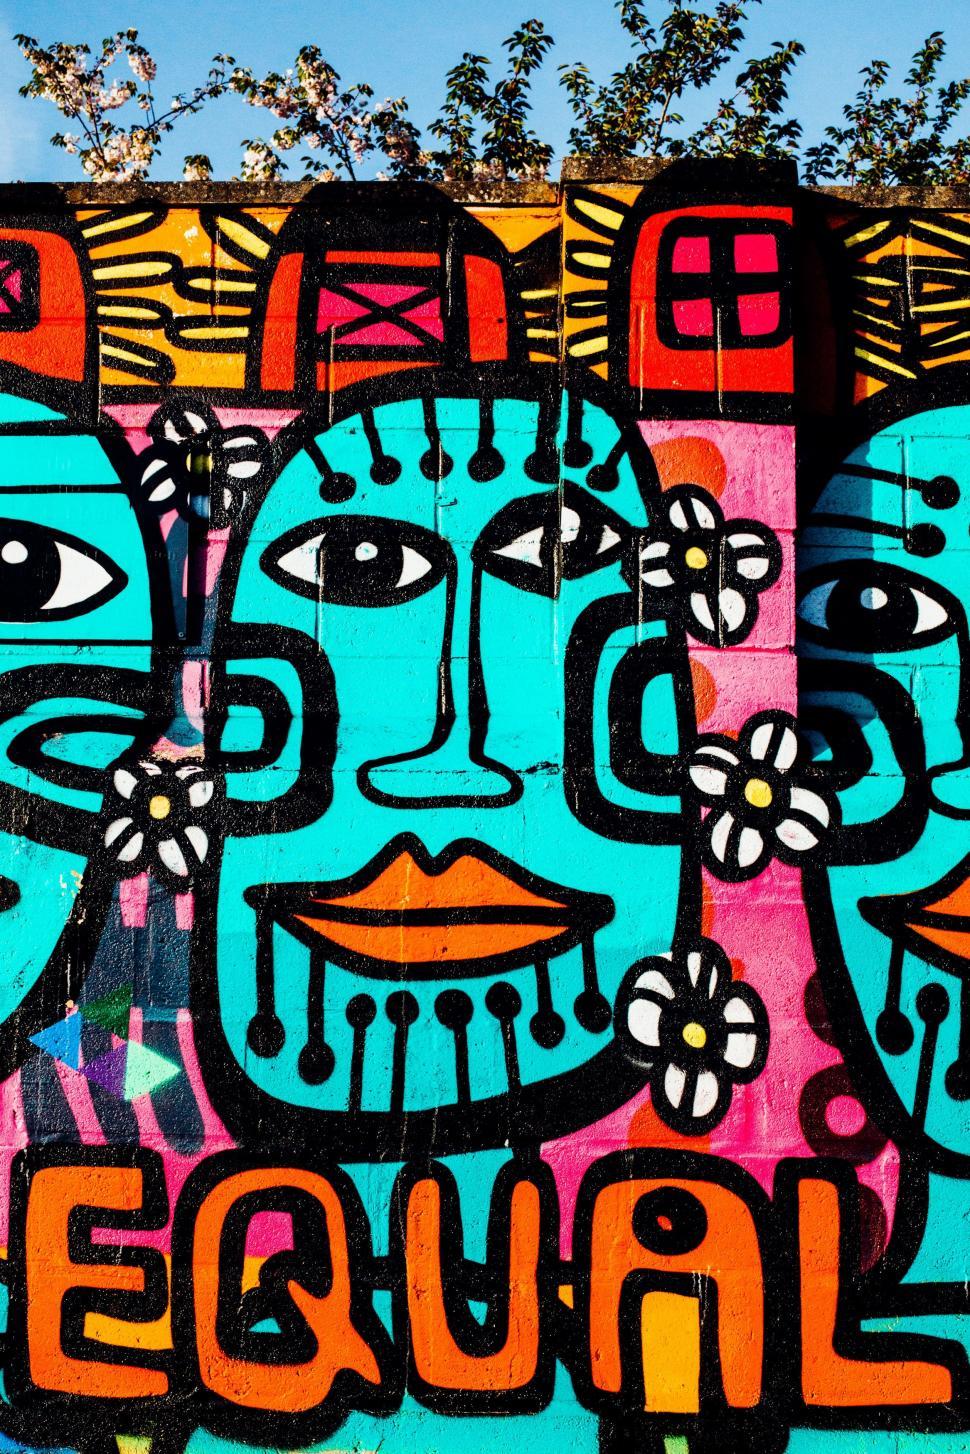 Free Image of Colorful Wall With Painted Faces 